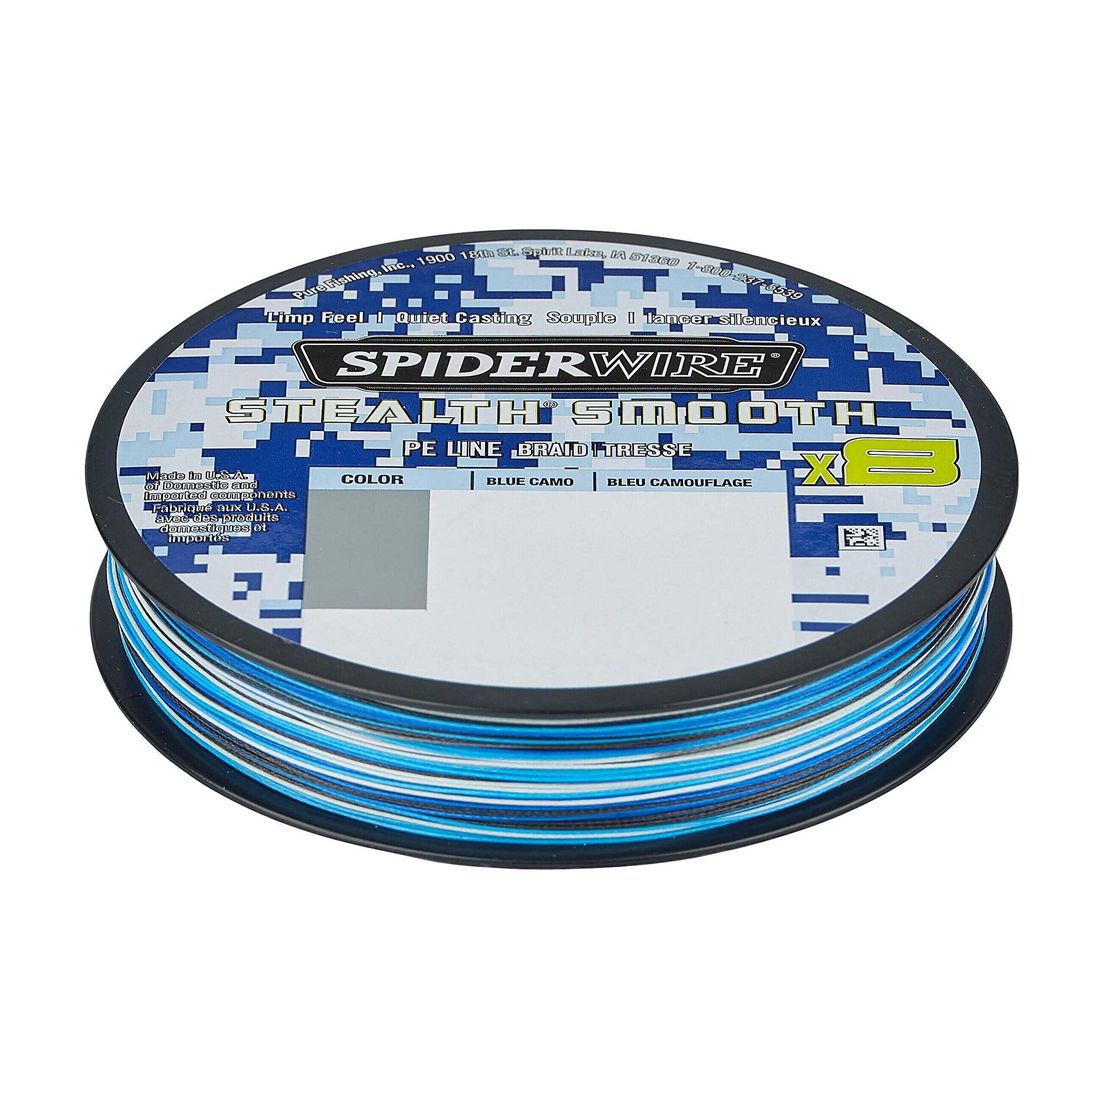 Spiderwire Stealth Smooth 8 Multi Colored Braided Line